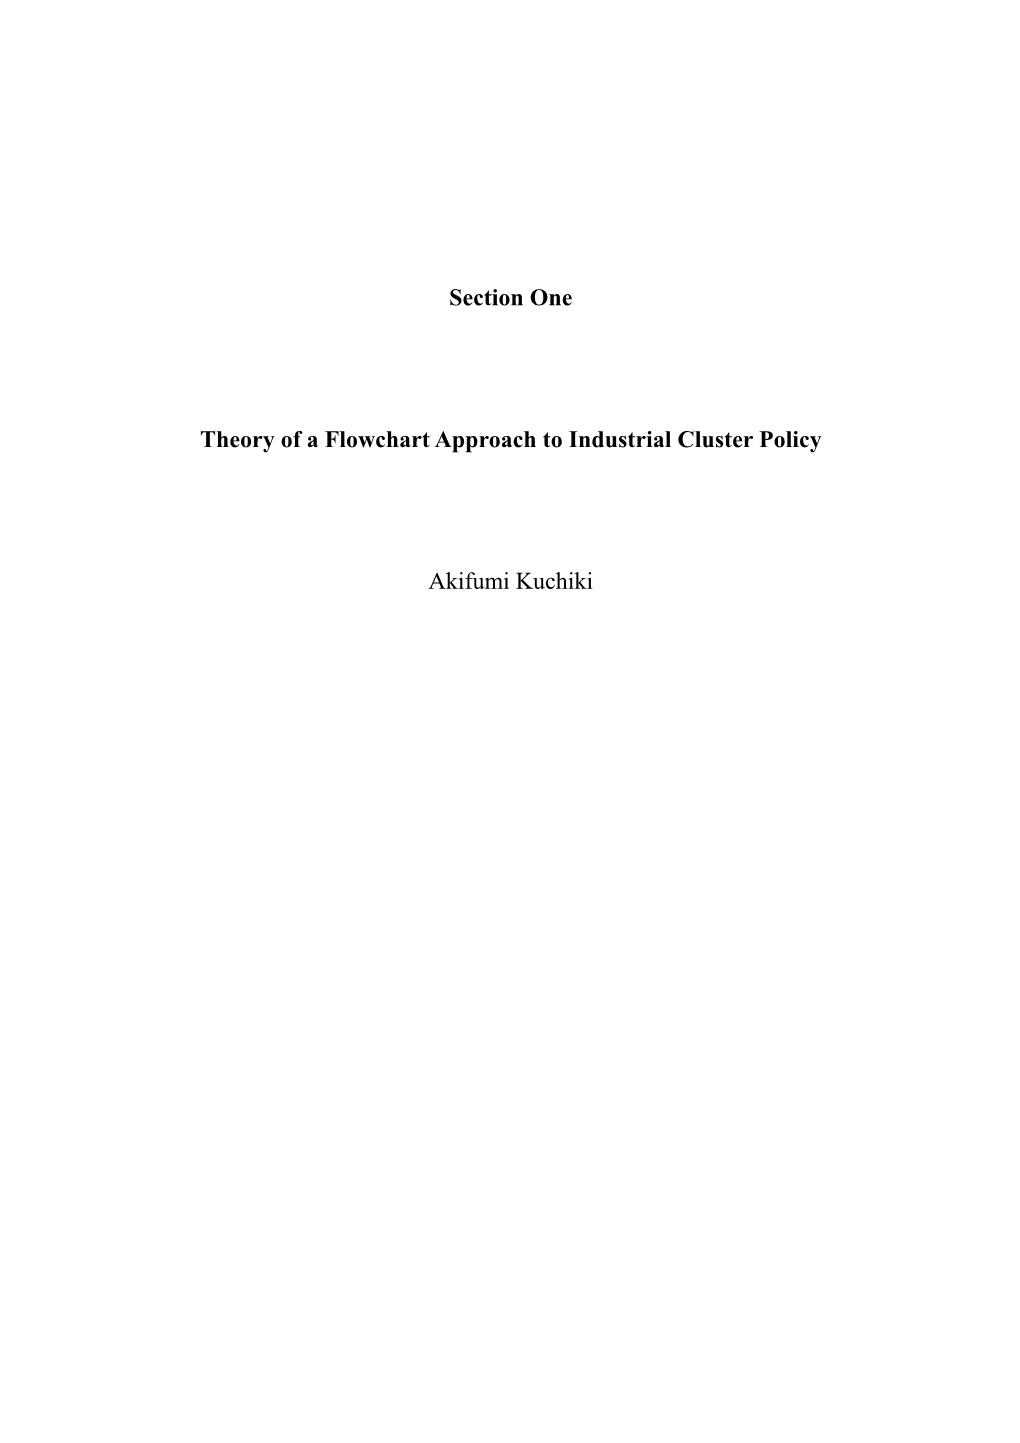 Theory of a Flowchart Approach to Industrial Cluster Policy